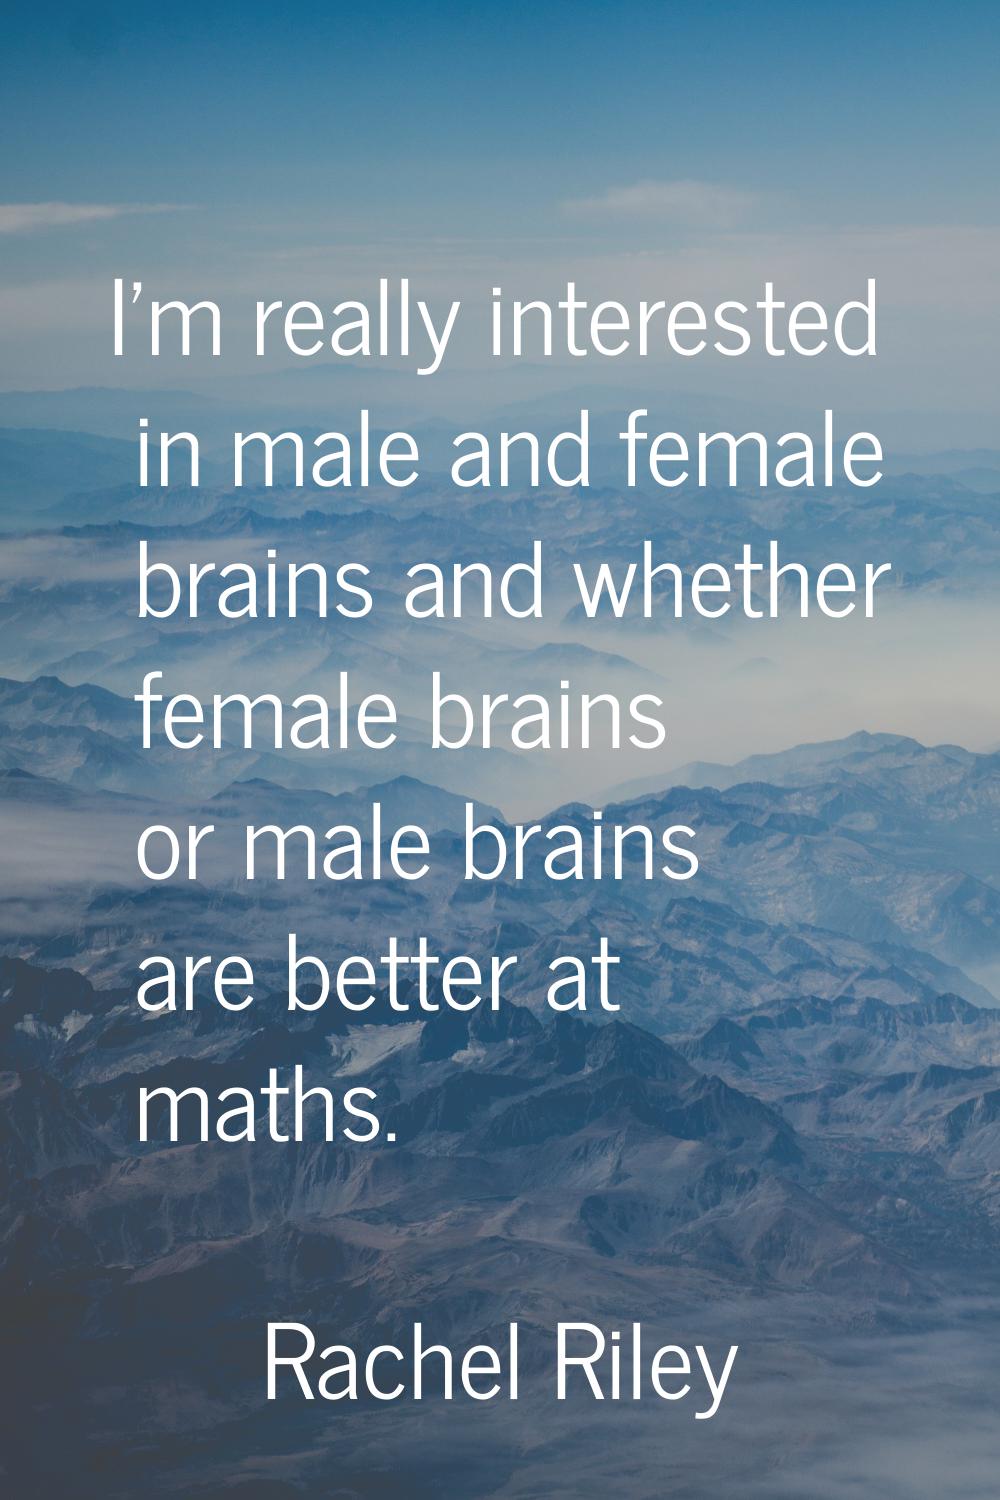 I'm really interested in male and female brains and whether female brains or male brains are better